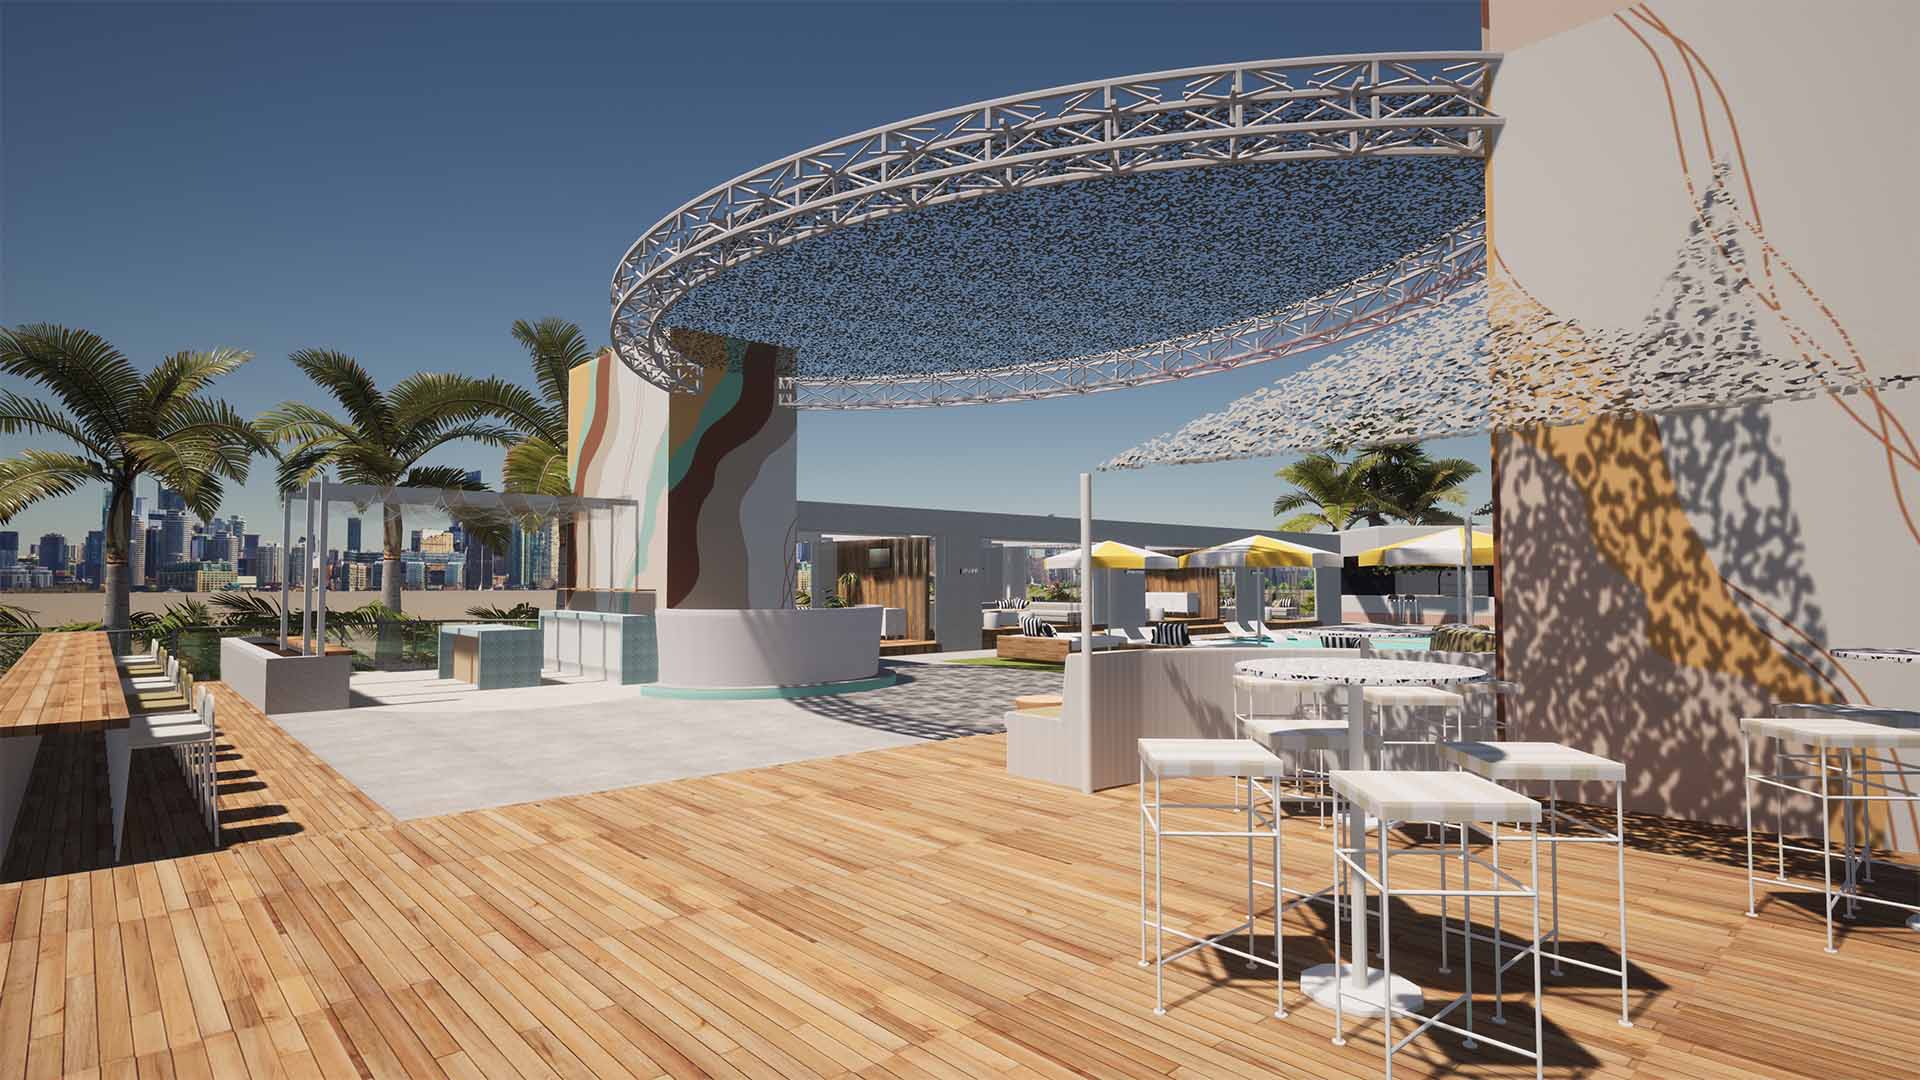 Cali Beach Club Is the Gold Coast's Soon-to-Open Cabana-Filled Oceanside Precinct on a Rooftop